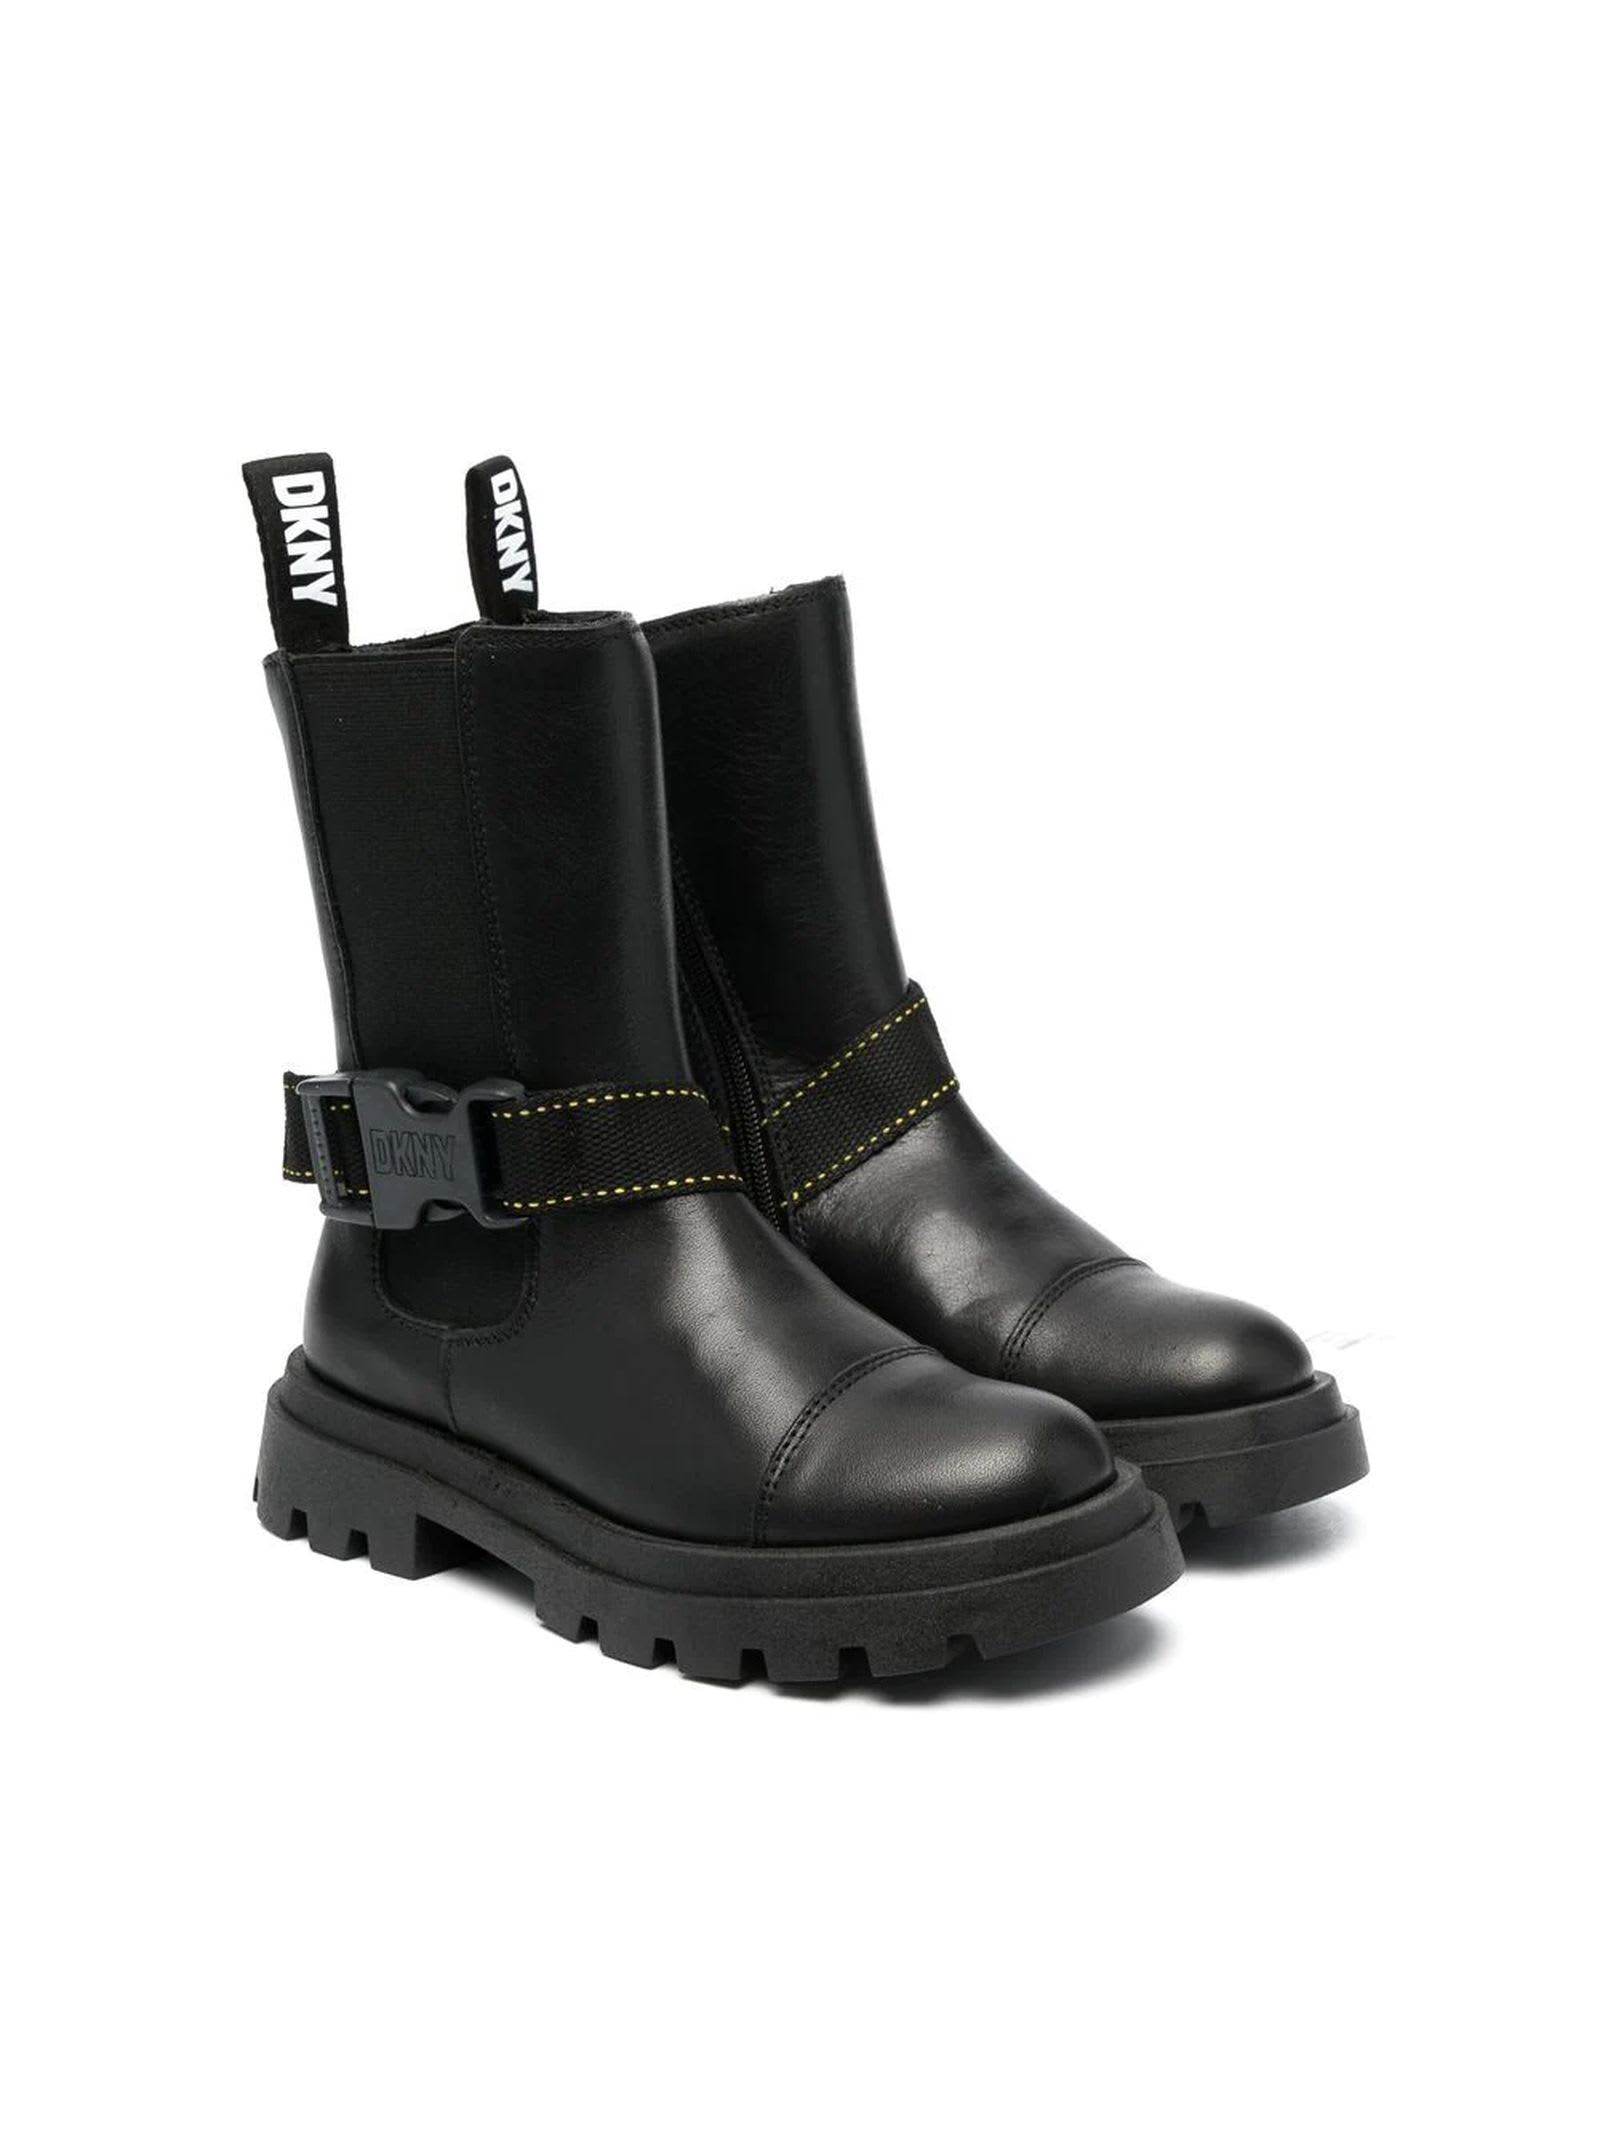 DKNY BLACK LEATHER BOOTS